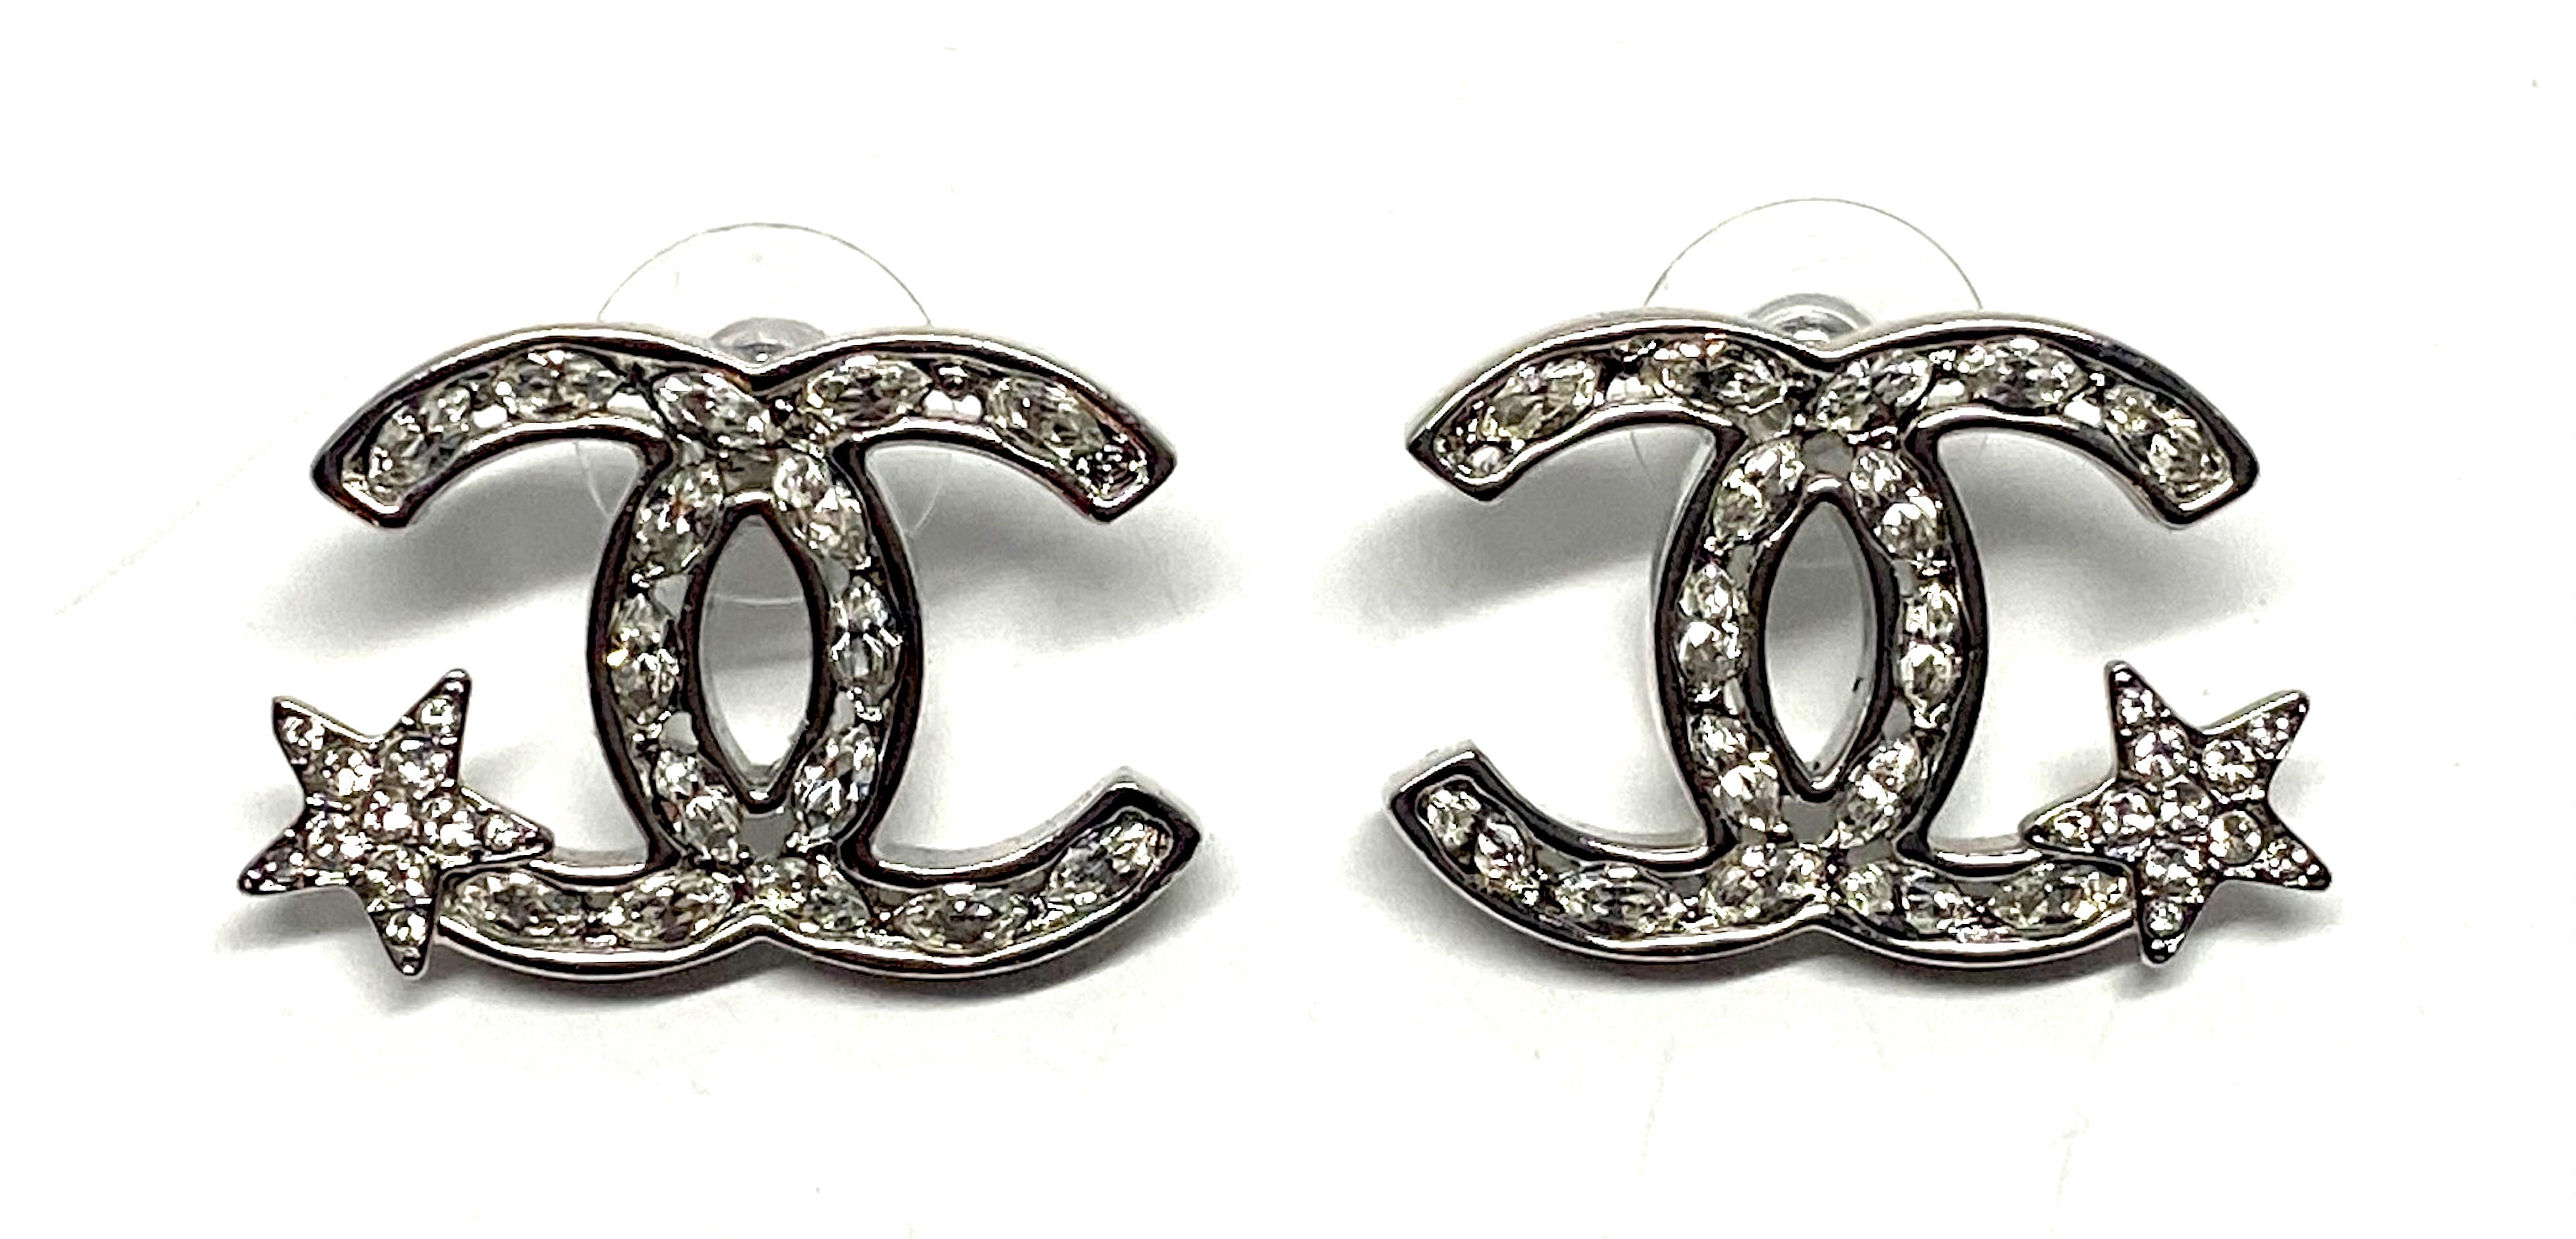 A fabulous pair of rhodium plate and rhinestone Chanel interlocking CC logo pierced earrings with star accent from the Spring 2020 collection. Each pierced earring measures 1.13 inches wide and .75 of an inch tall. The interlocking CCs are set with